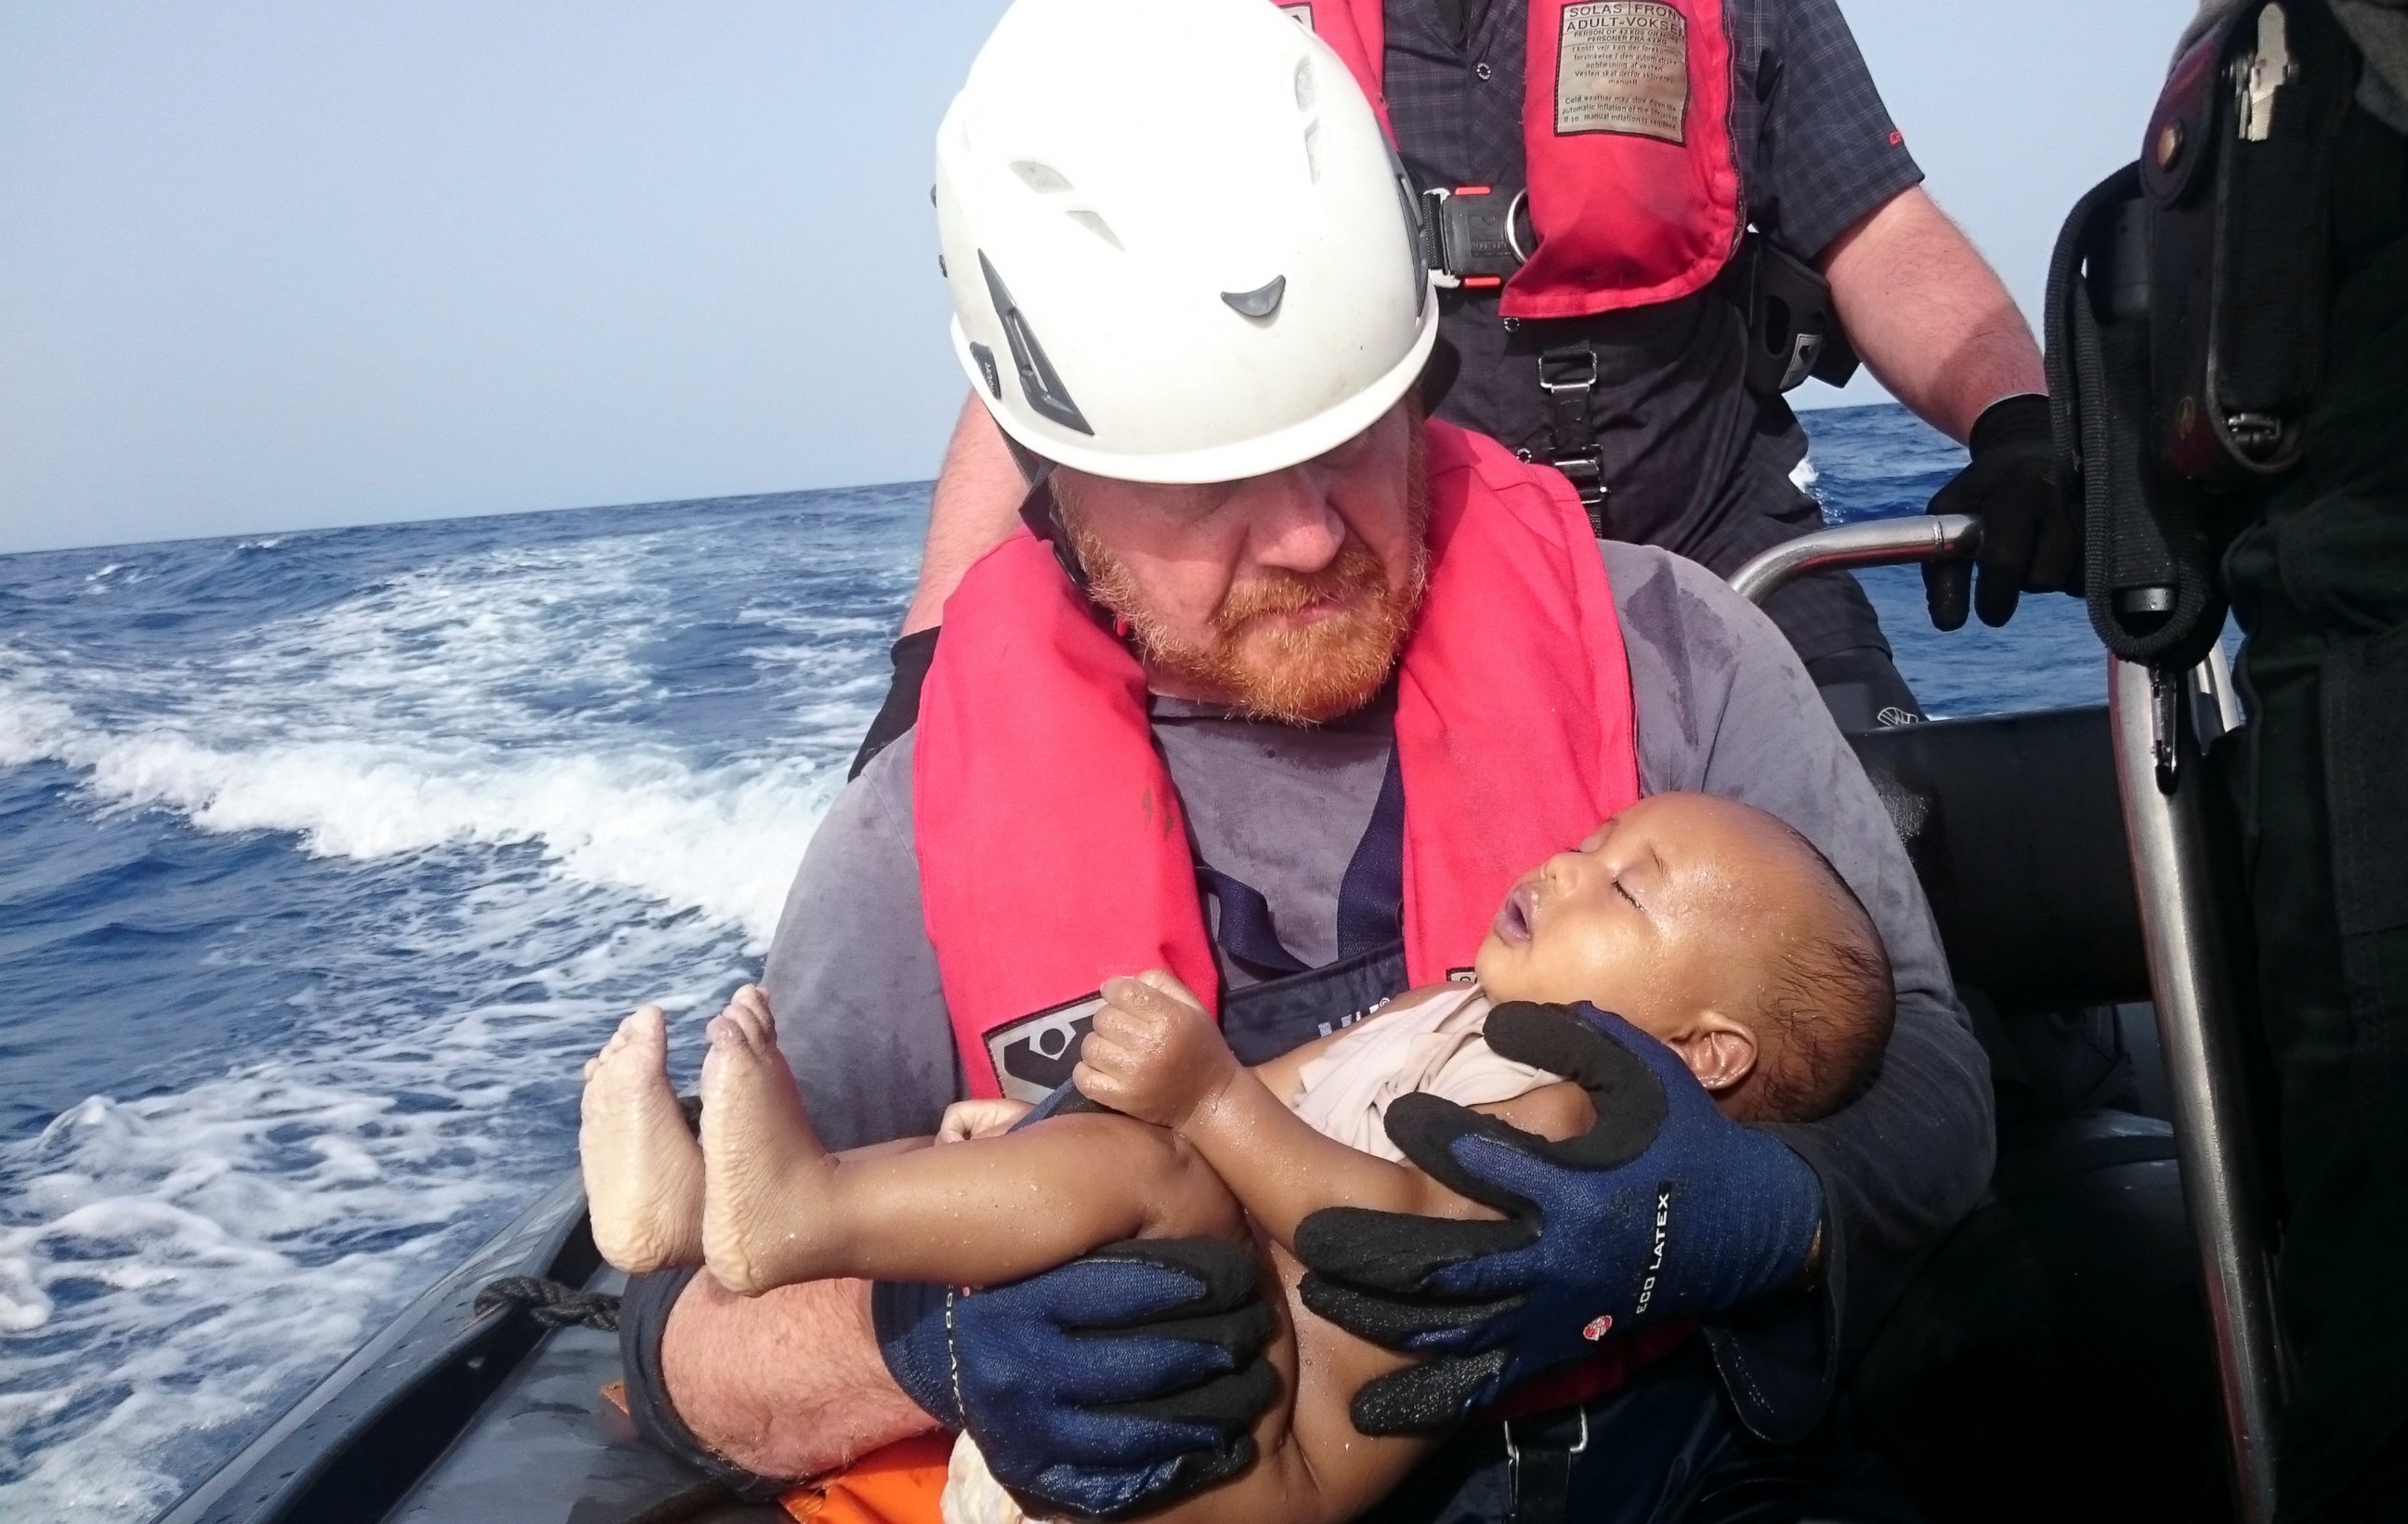 PHOTO: German rescuer from the humanitarian organization Sea-Watch holds a drowned migrant baby, off the Libyan coast on May 27, 2016. 